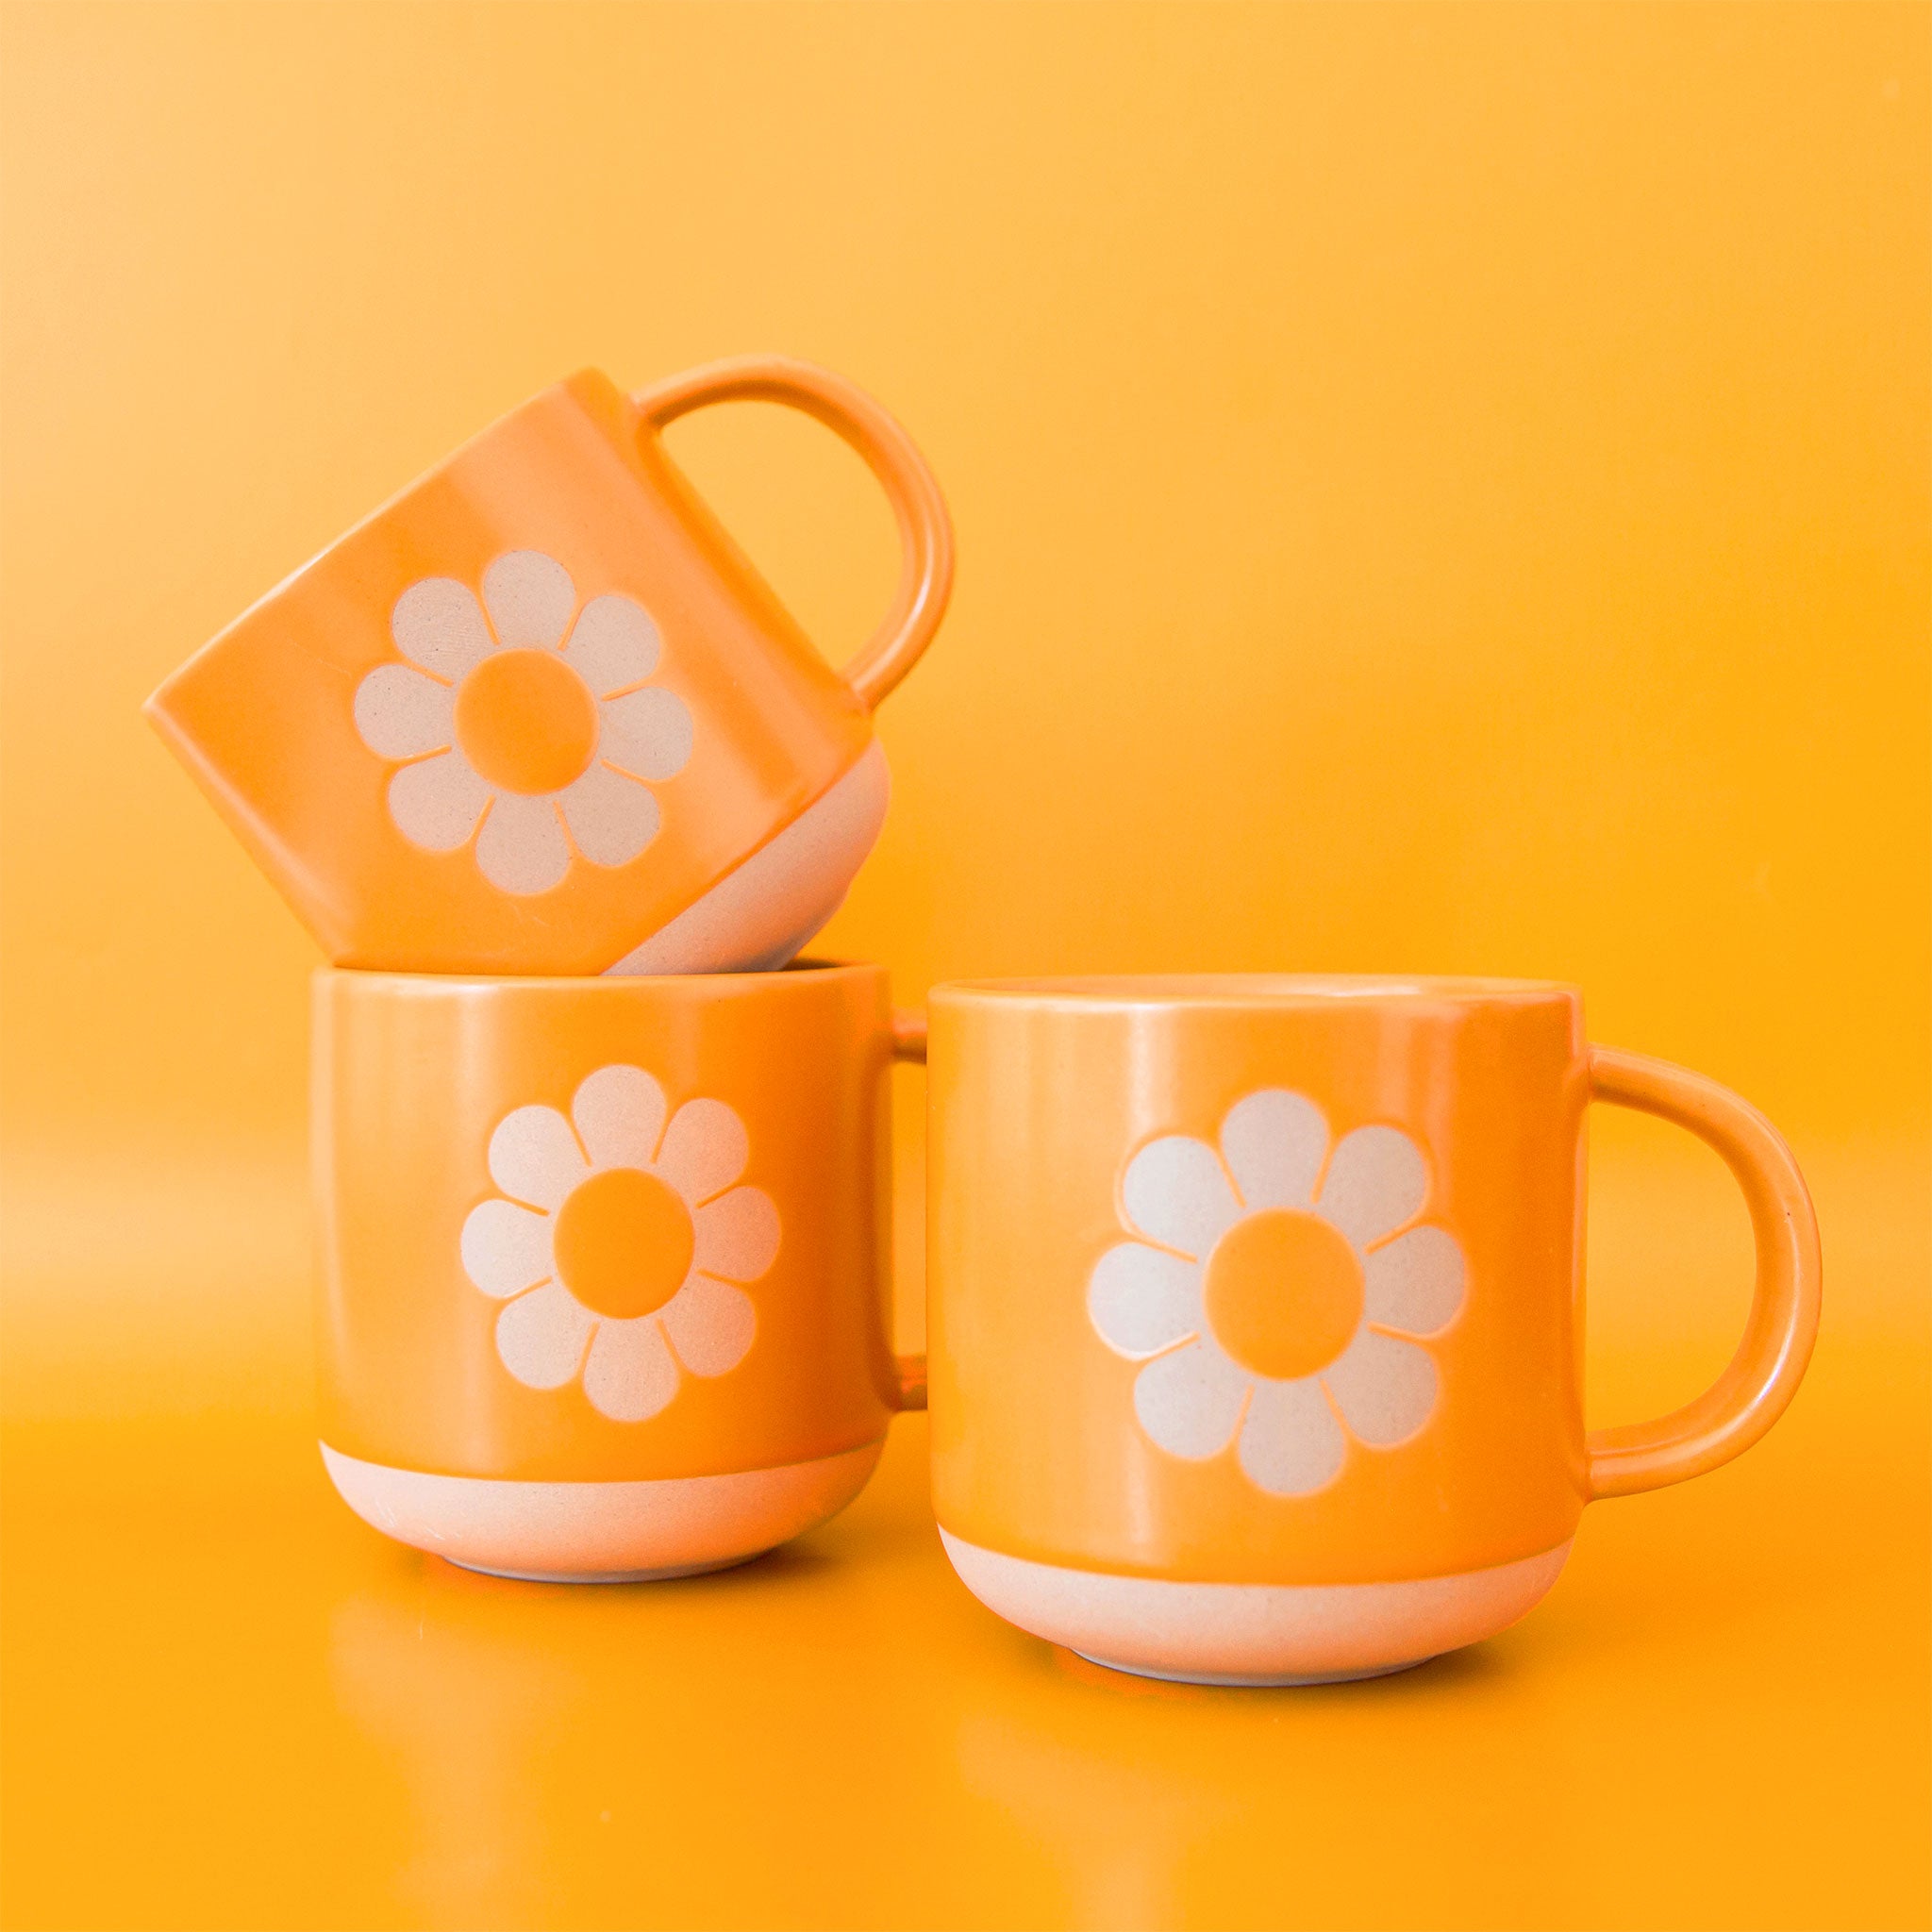 On a bright yellow background is three ceramic mugs with a daisy design on the front. 